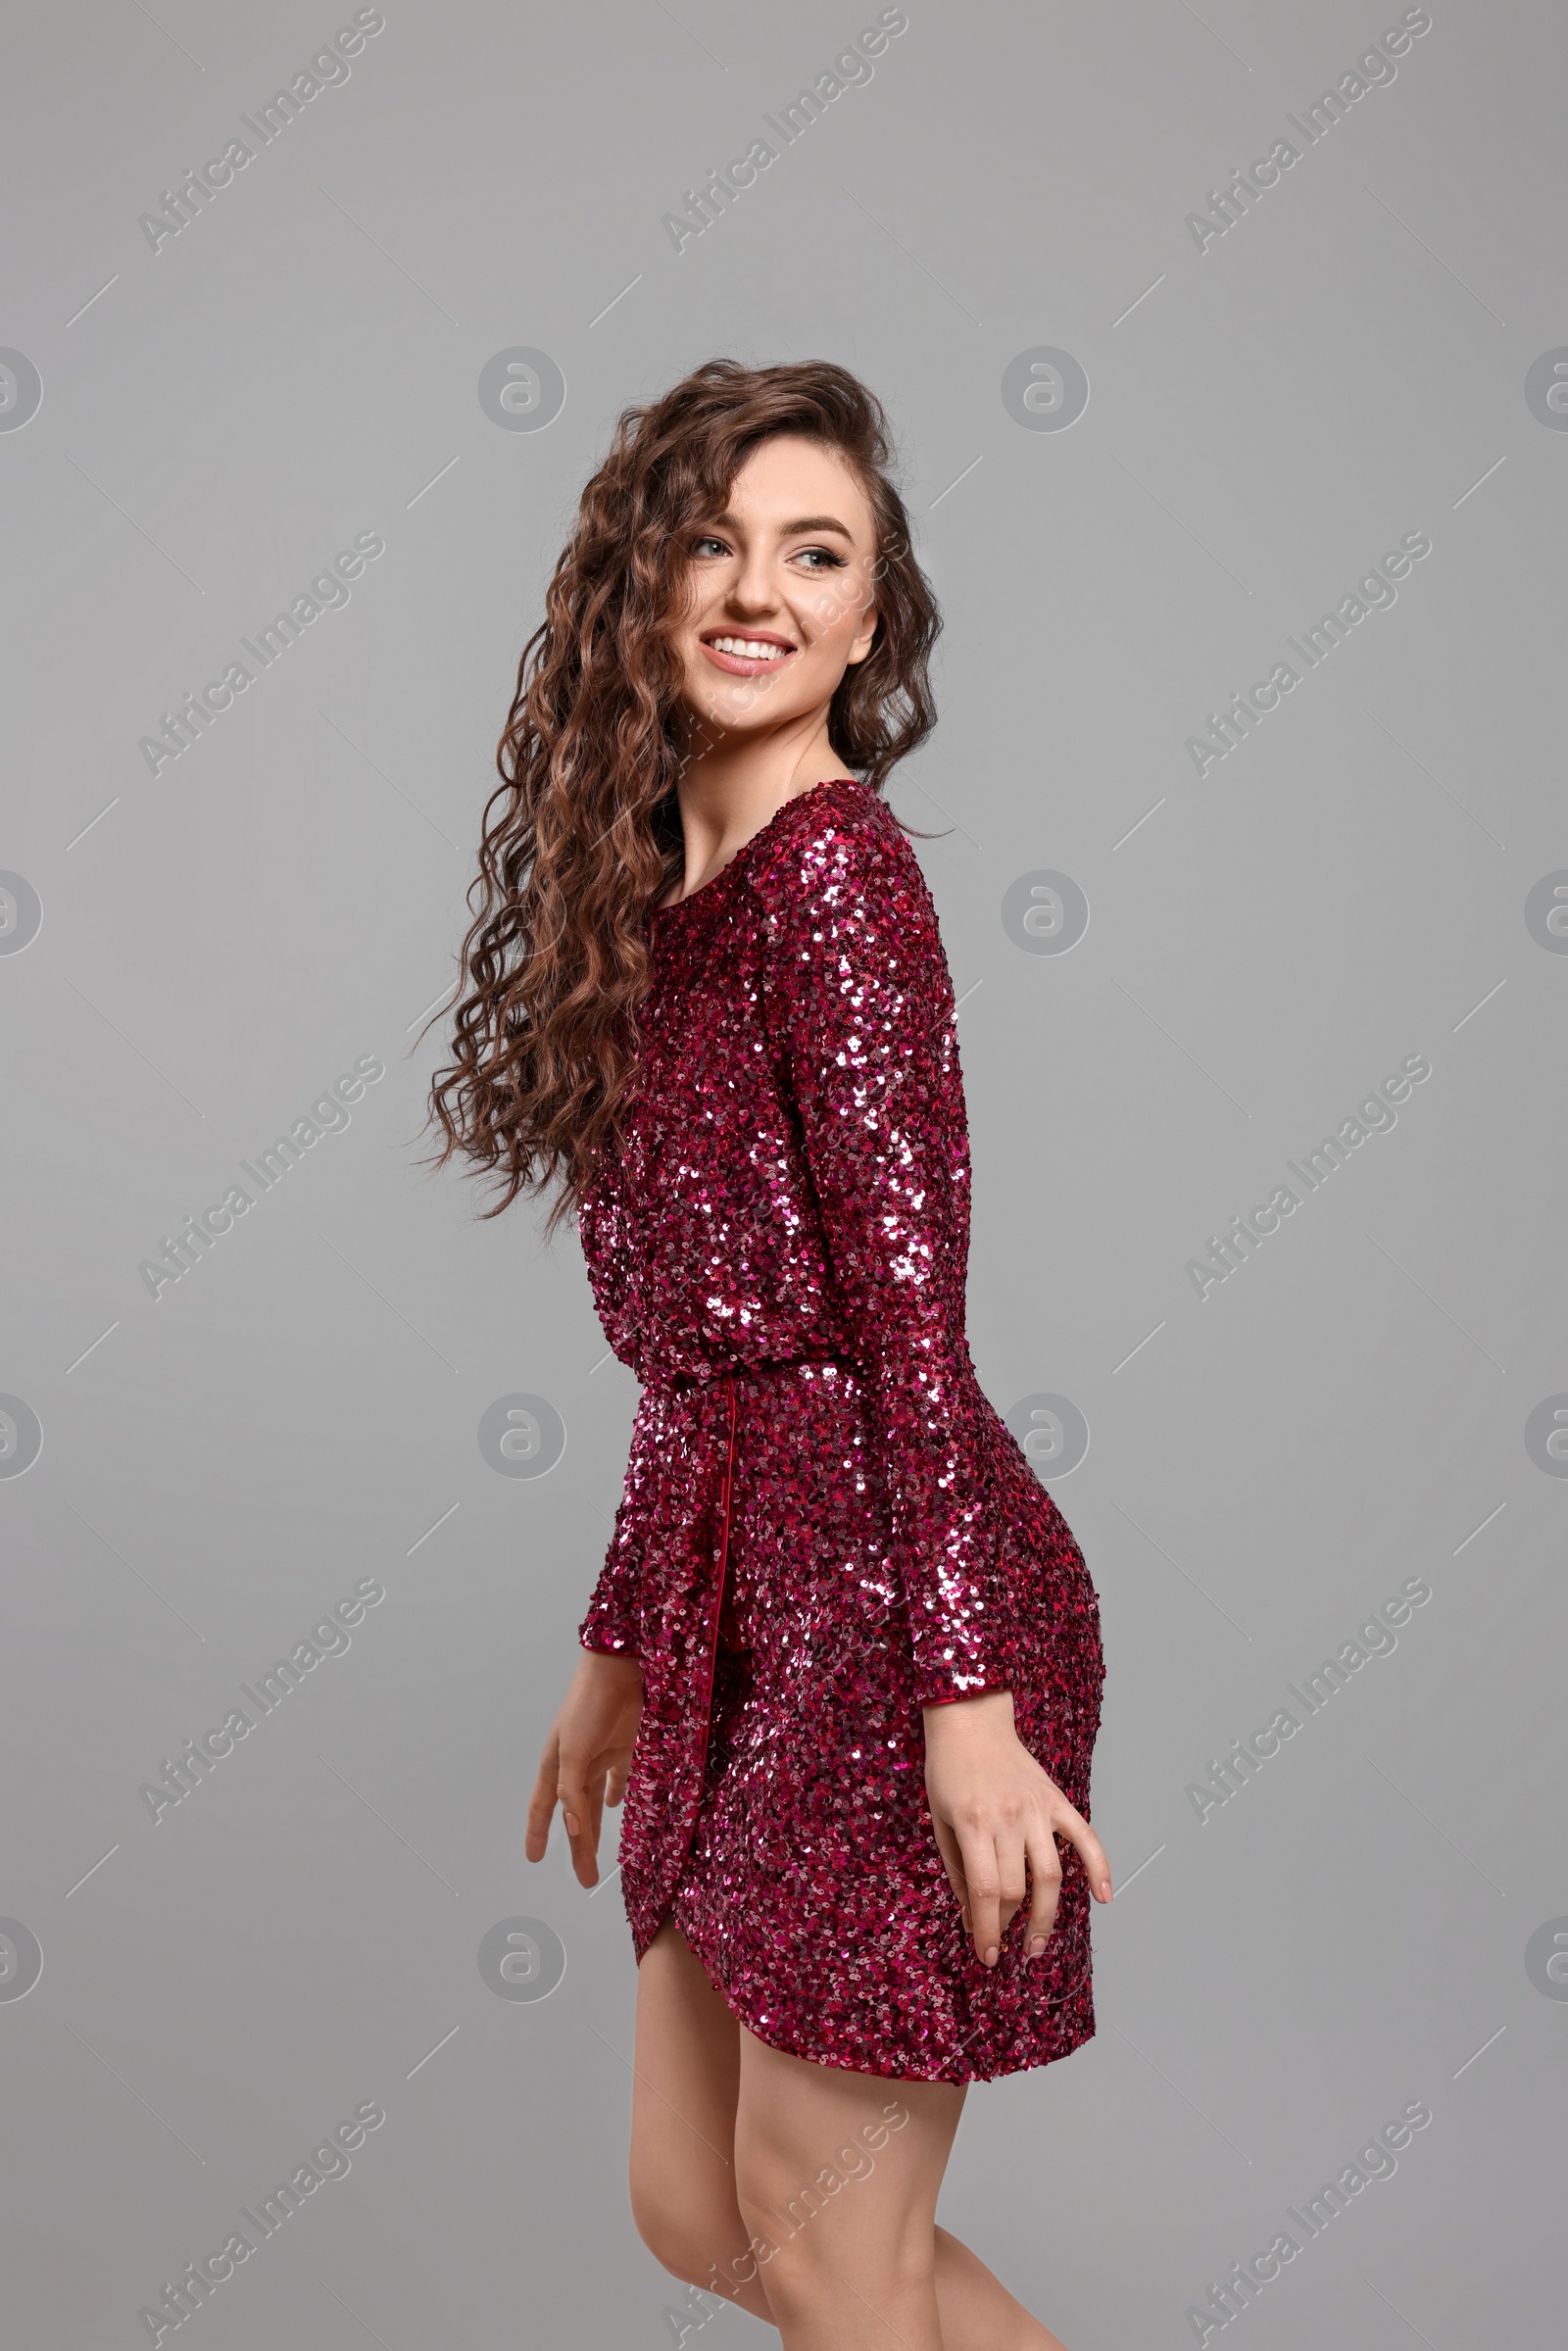 Photo of Beautiful young woman with long curly brown hair in pink sequin dress on grey background